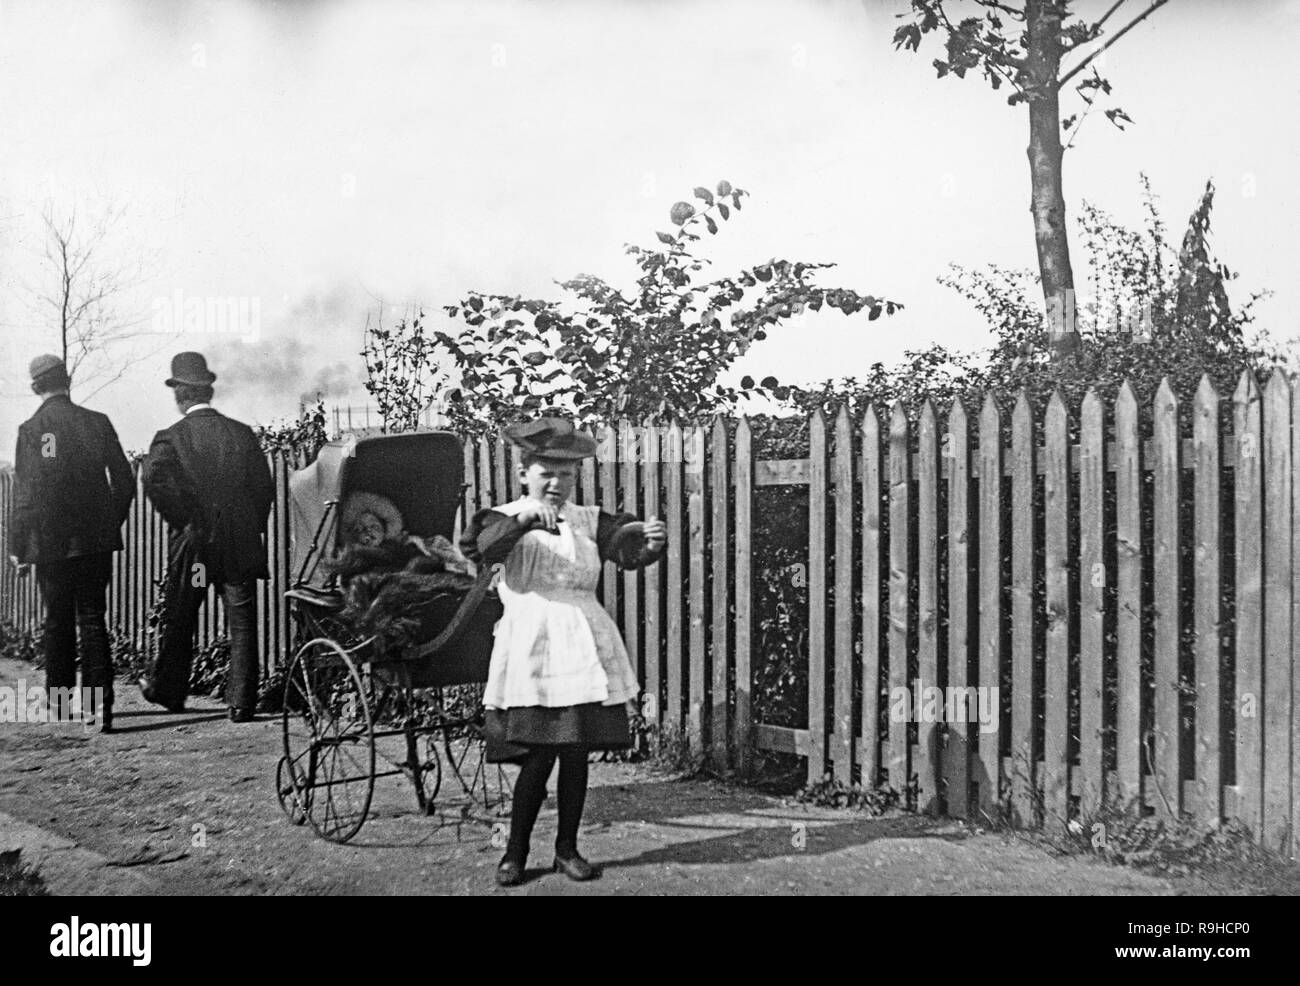 A late Victorian black and white photograph showing a very young girl with a pram with a bay in it, on a street in England, while two men walk away behind the pram. The pram has large iron wheels, and all the figures show good examples of fashions of the era. Stock Photo